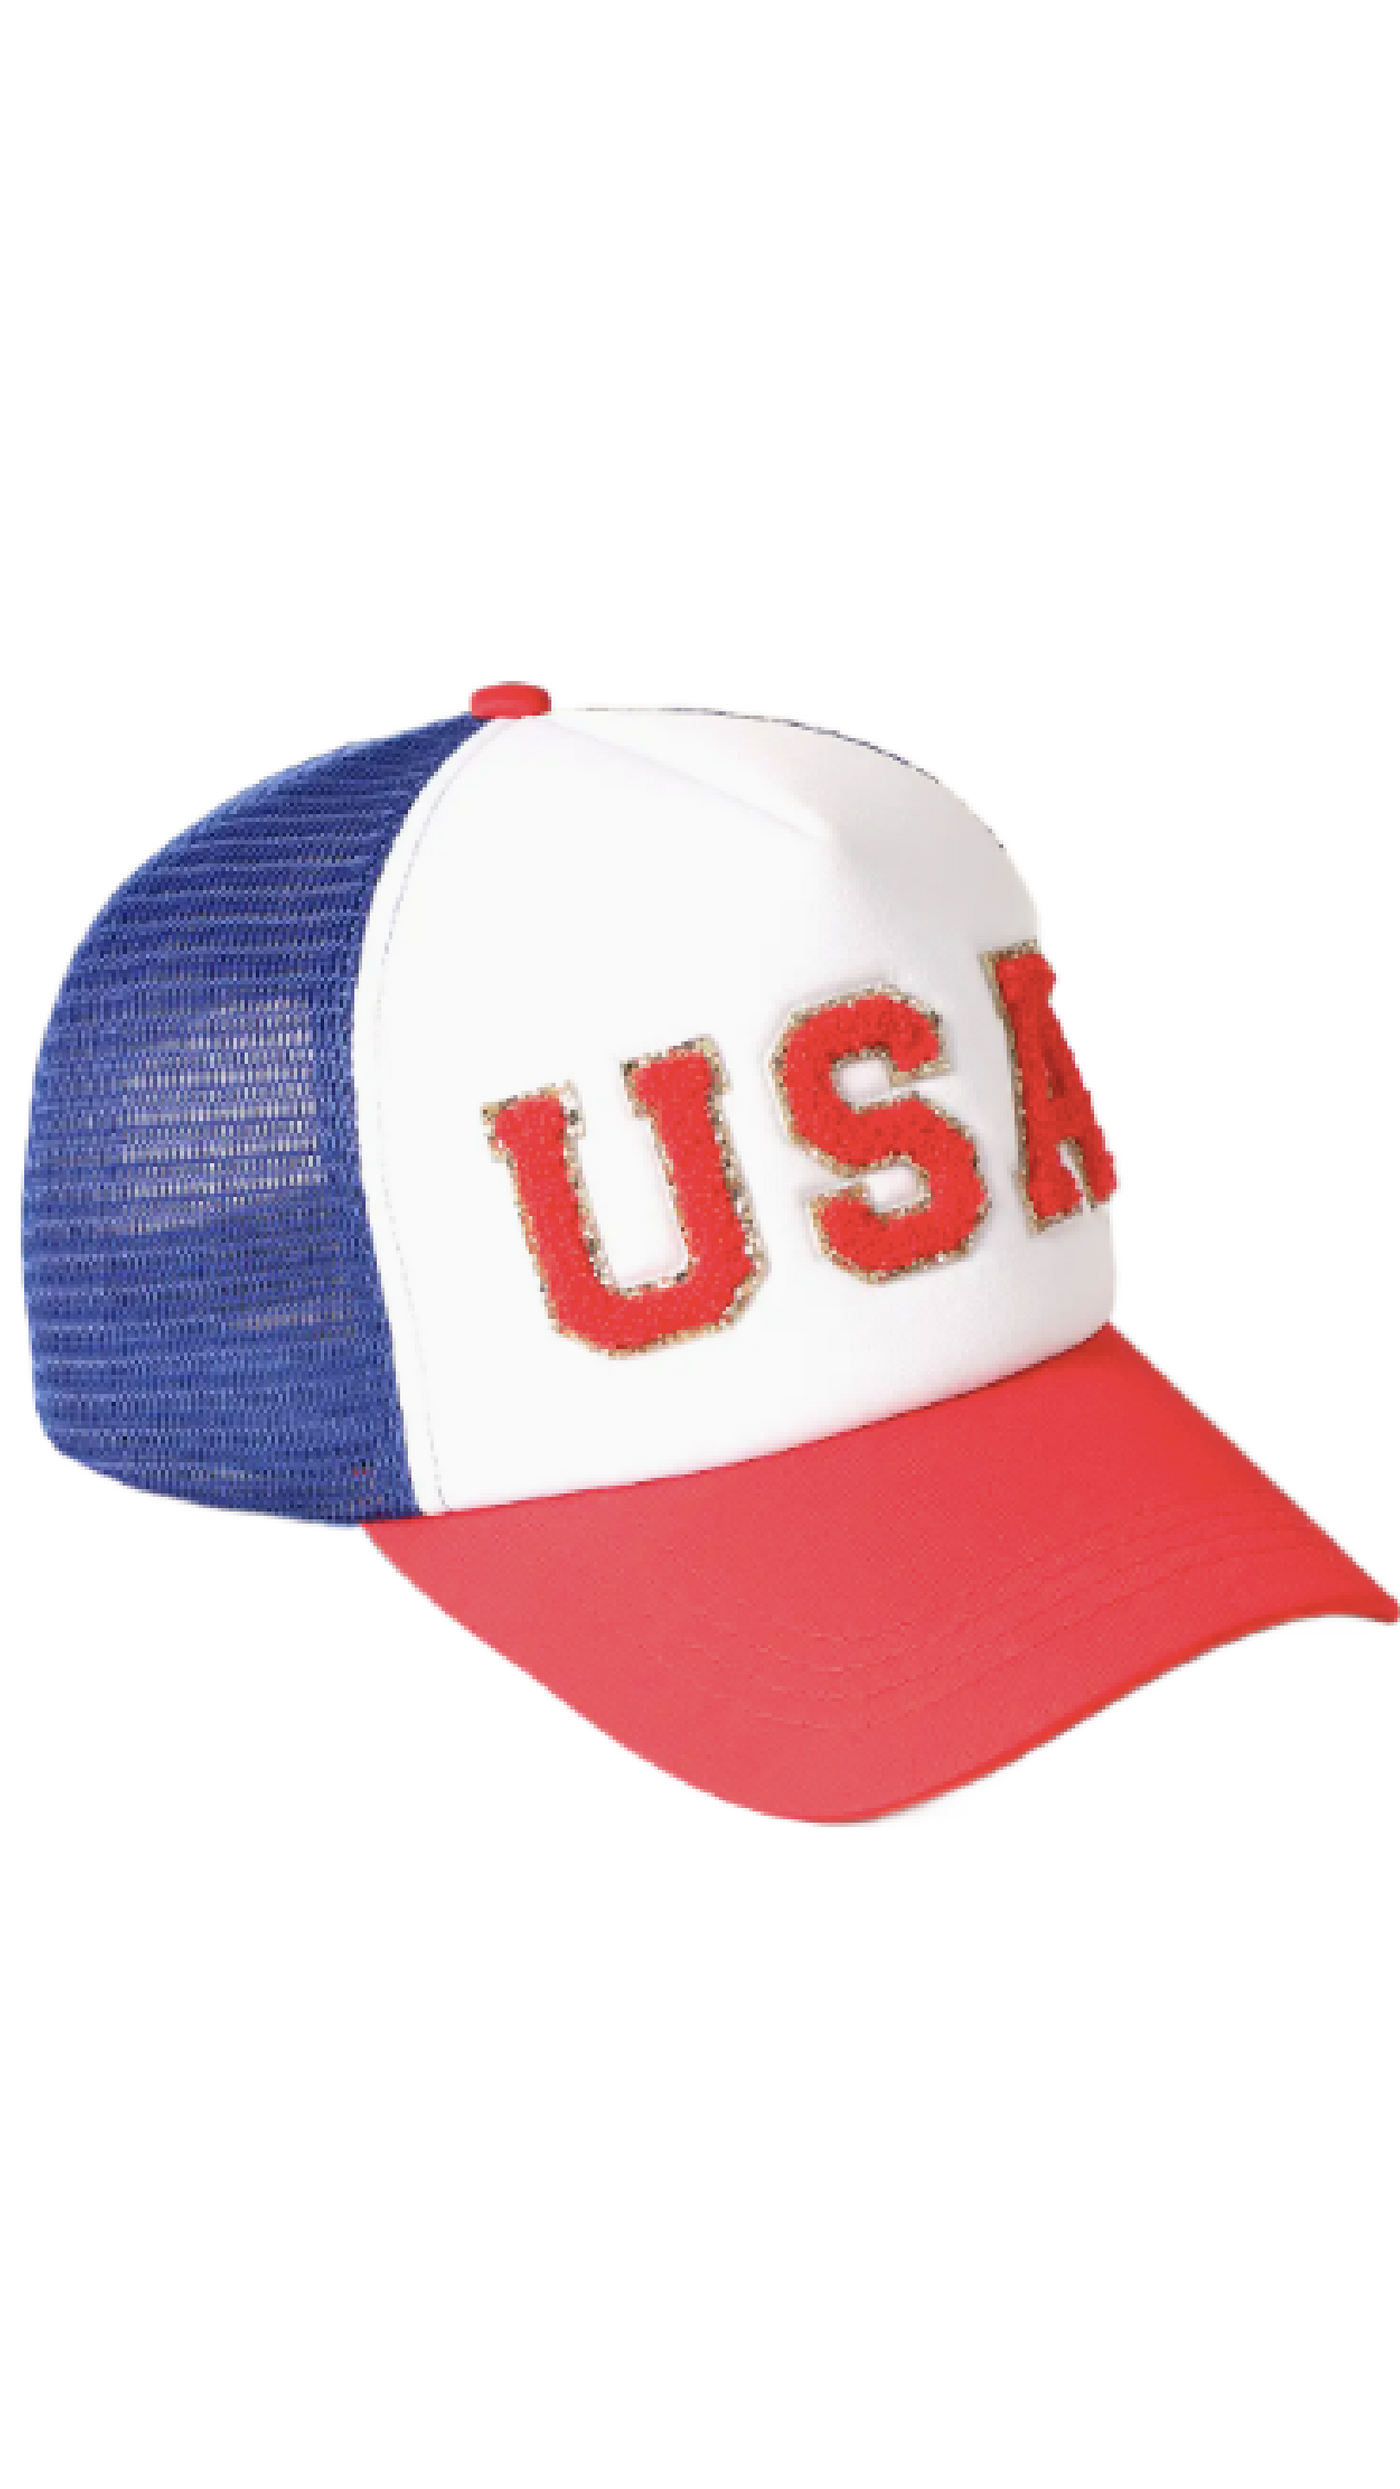 Retro USA Hat - Piper and Hollow Boutique